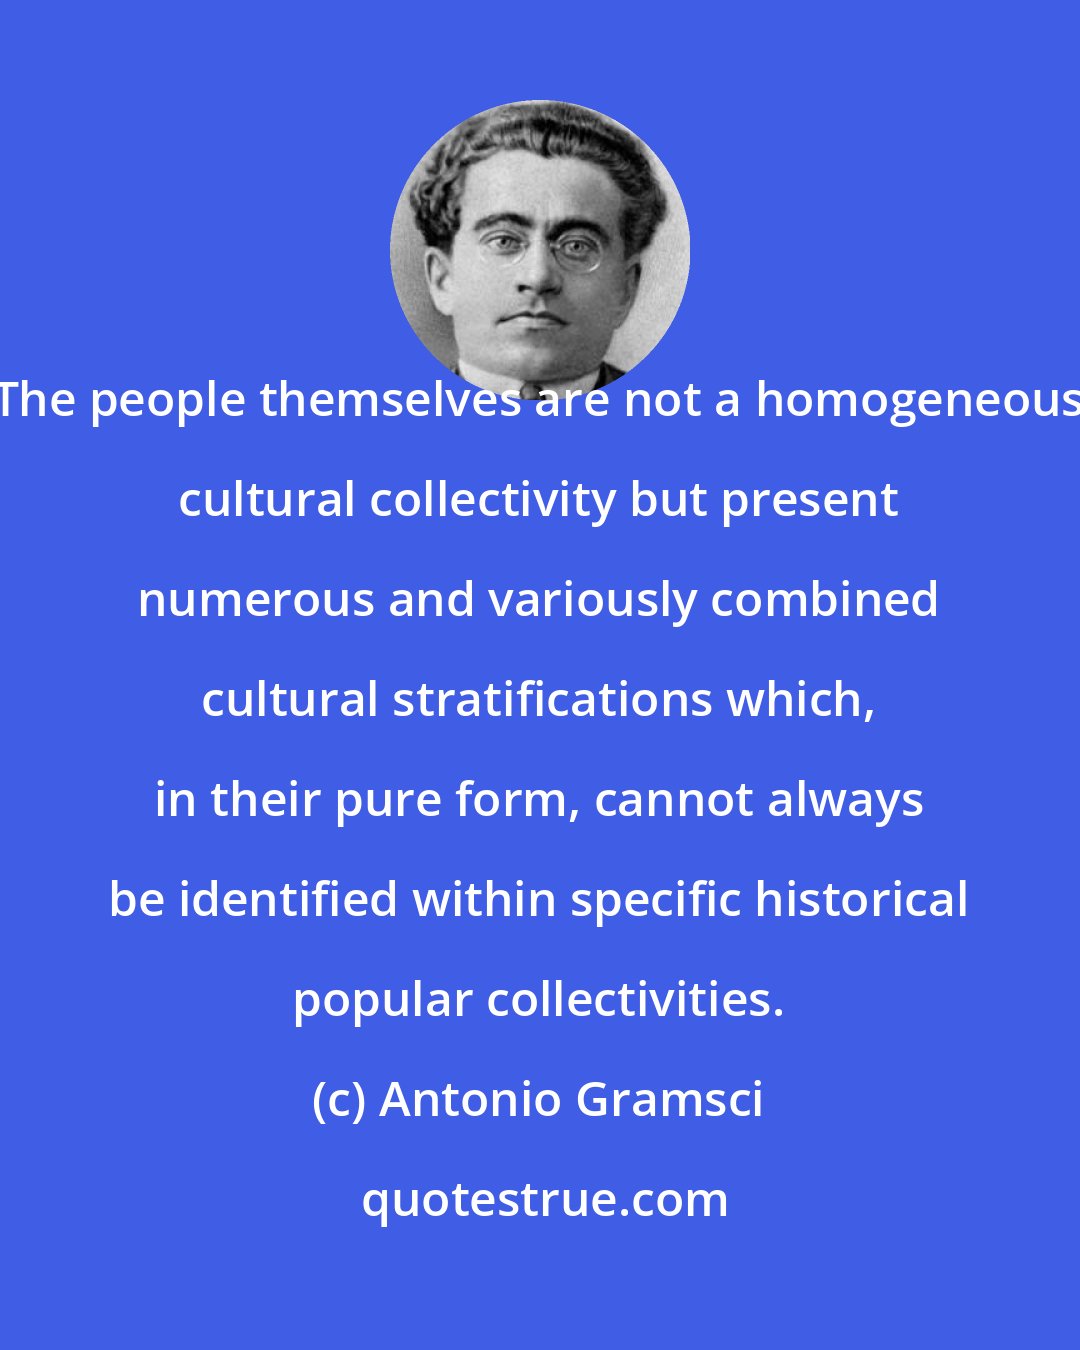 Antonio Gramsci: The people themselves are not a homogeneous cultural collectivity but present numerous and variously combined cultural stratifications which, in their pure form, cannot always be identified within specific historical popular collectivities.